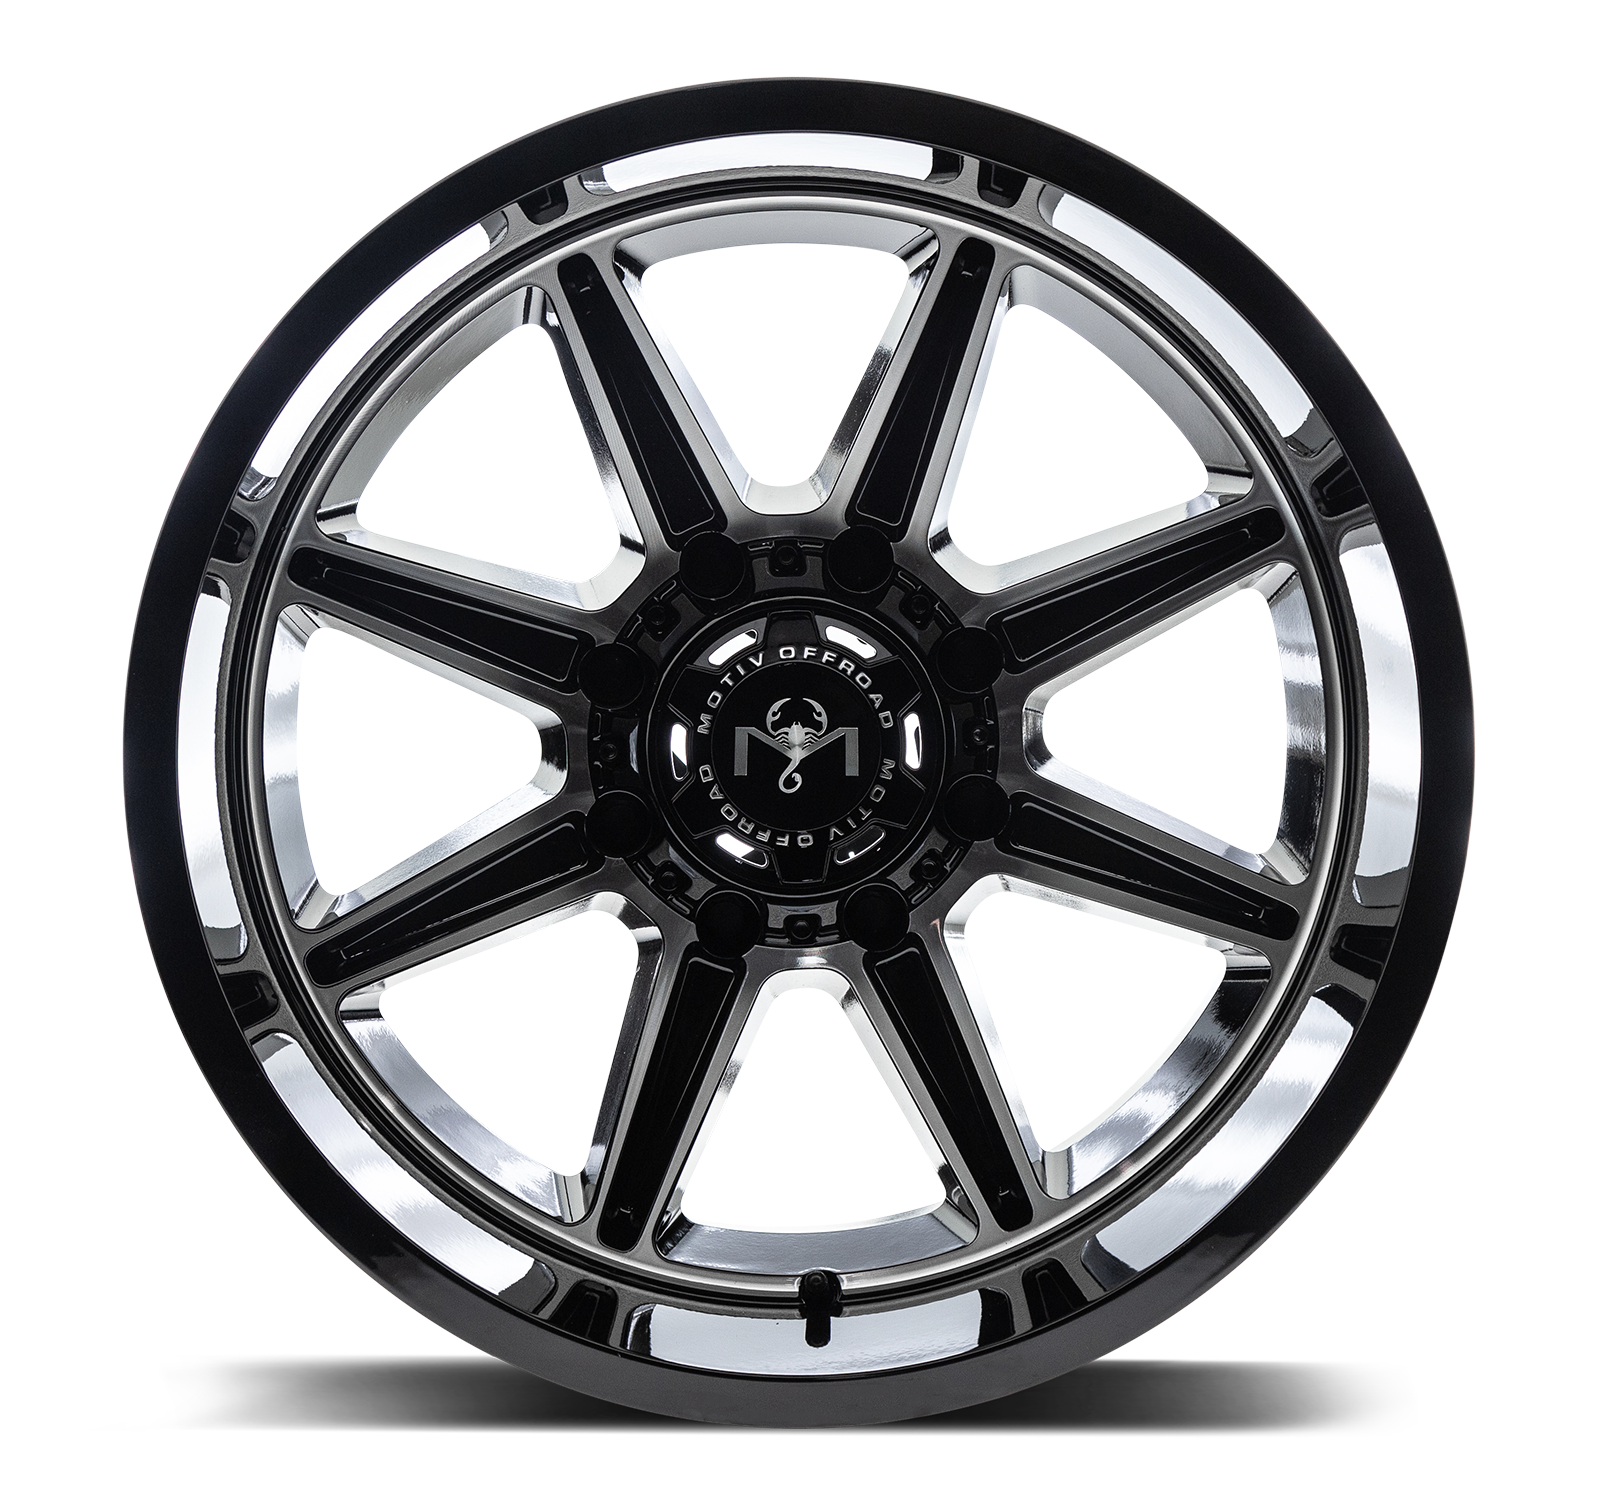 Motiv Off Road BALAST 20X9 +18 8X180 Gloss Black With Machined Face Accents